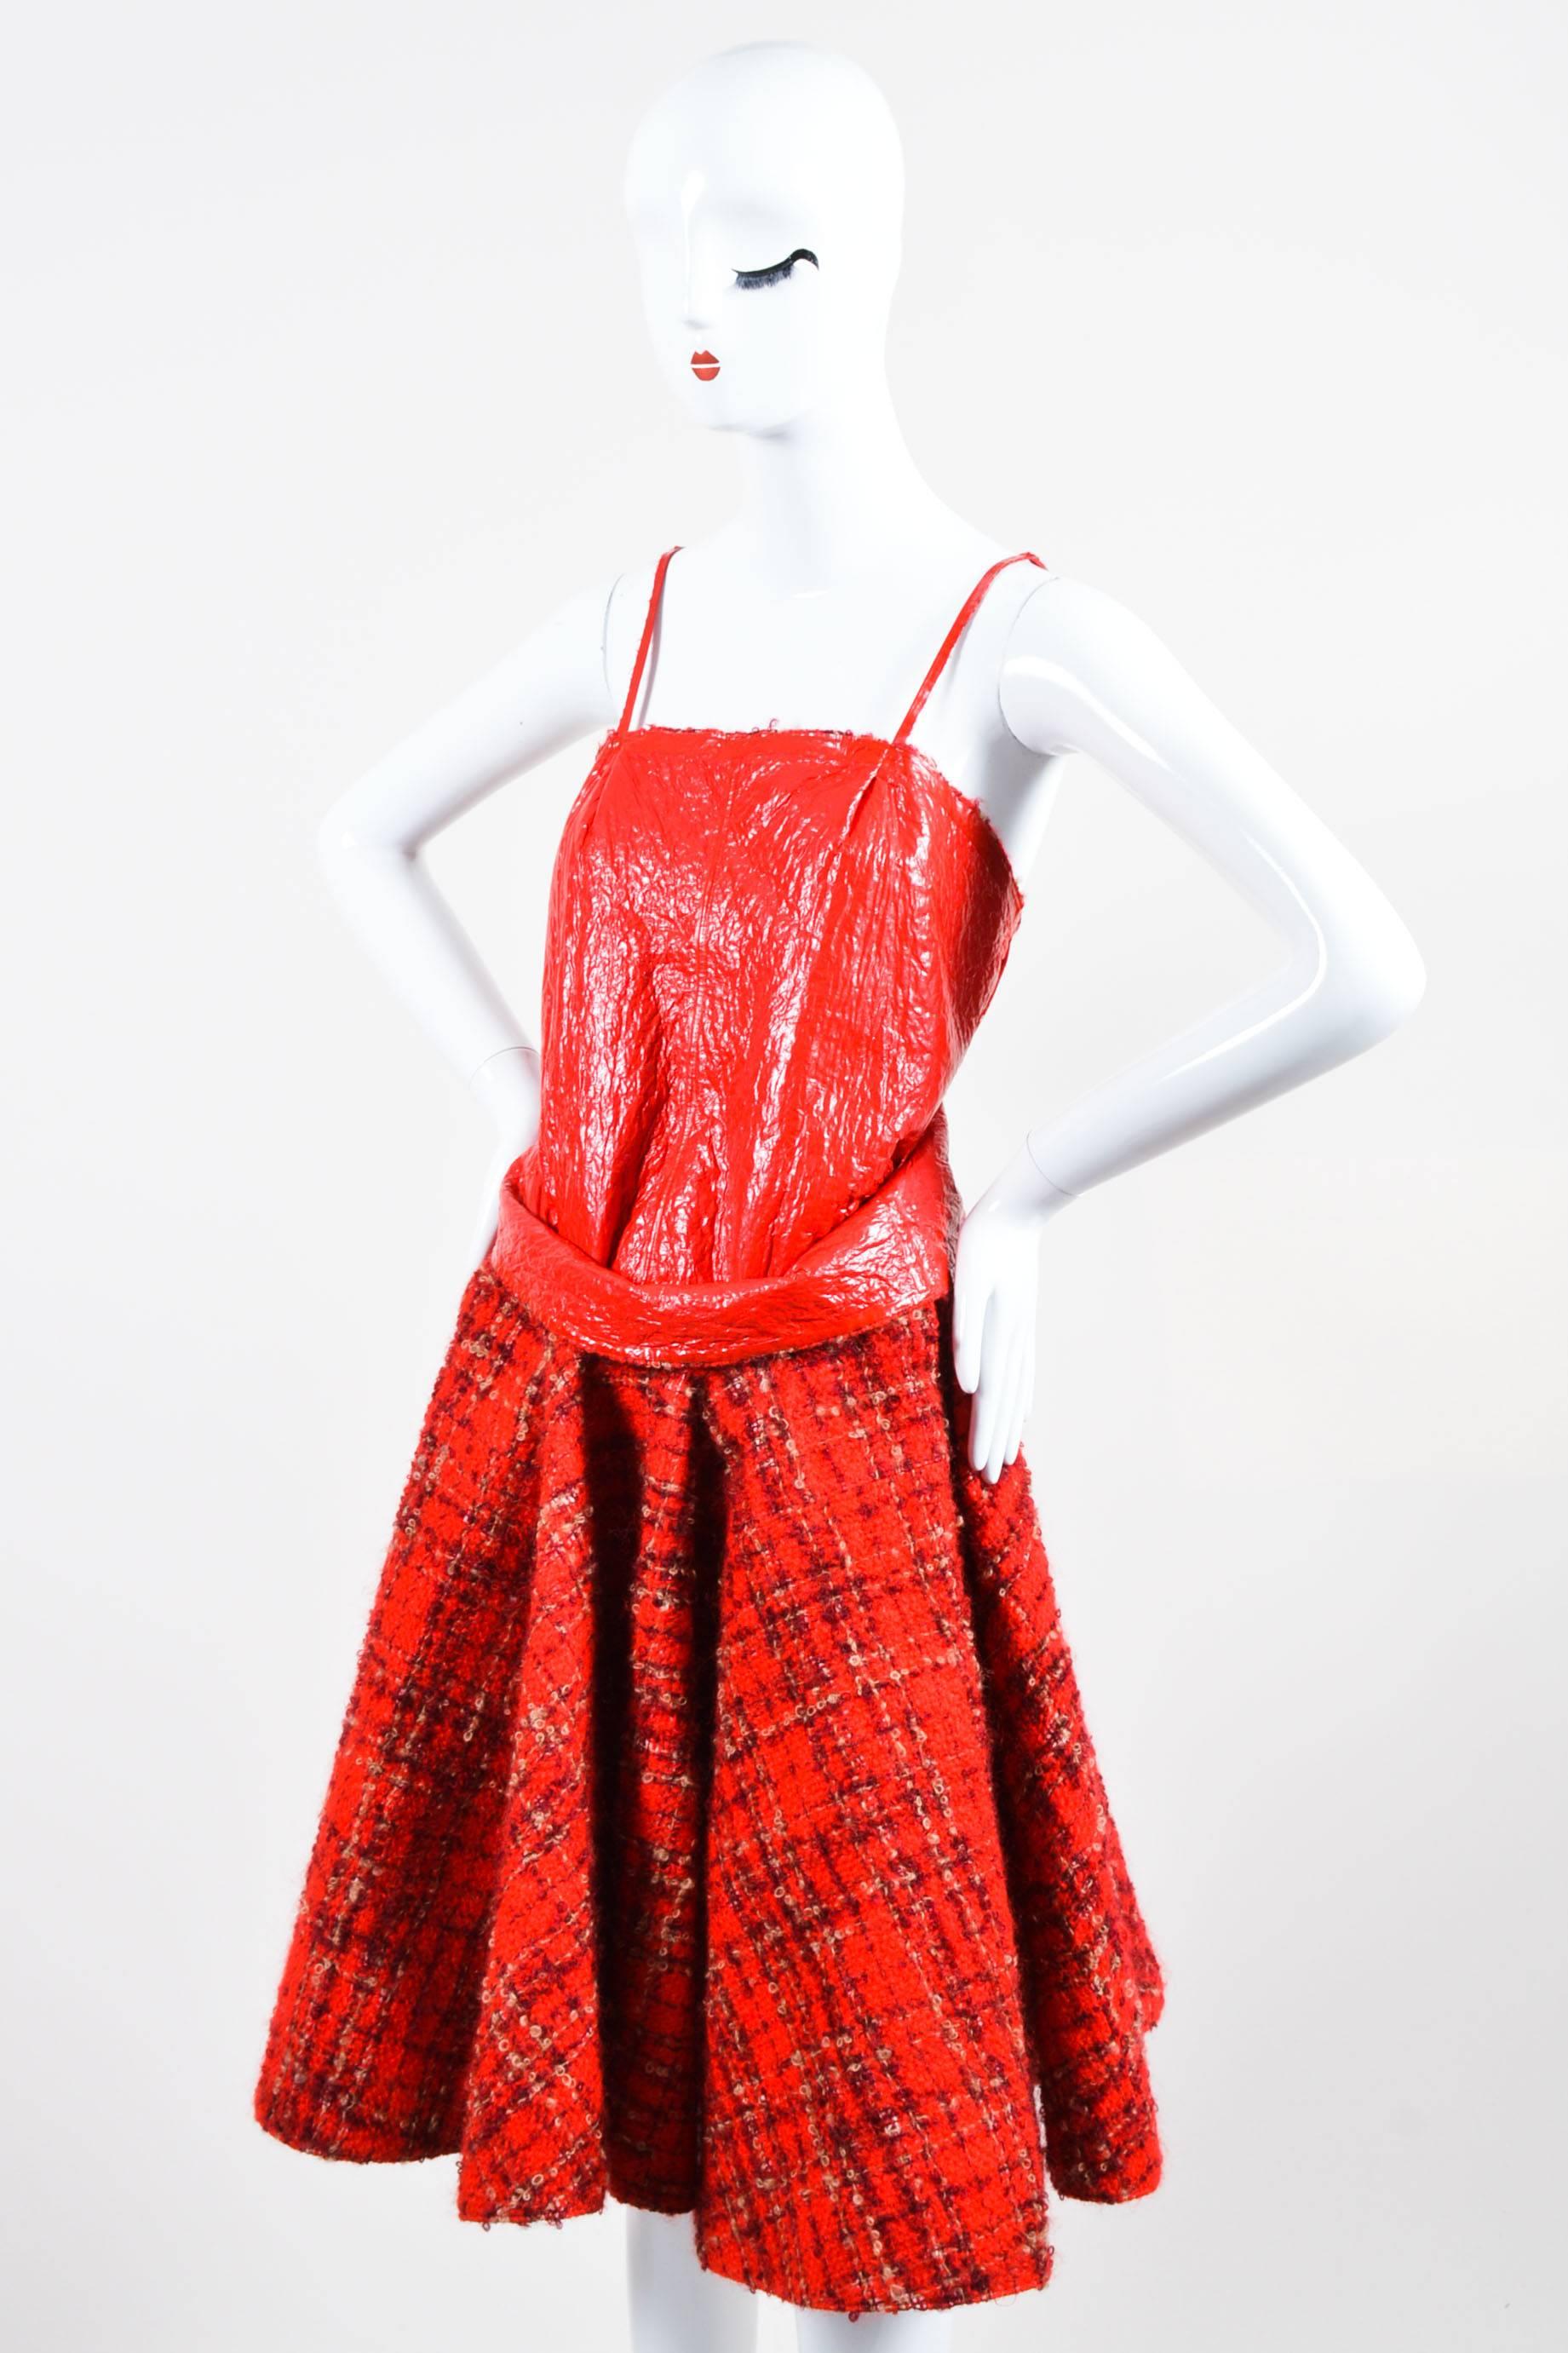 Retails at $1685. Stand out from the rest in this uniquely constructed dress. Tweed wool with checkered pattern throughout. Contrast slick polyurethane detail on body and underneath skirt. Draped skirt; partially exposed at sides. Sleeveless with